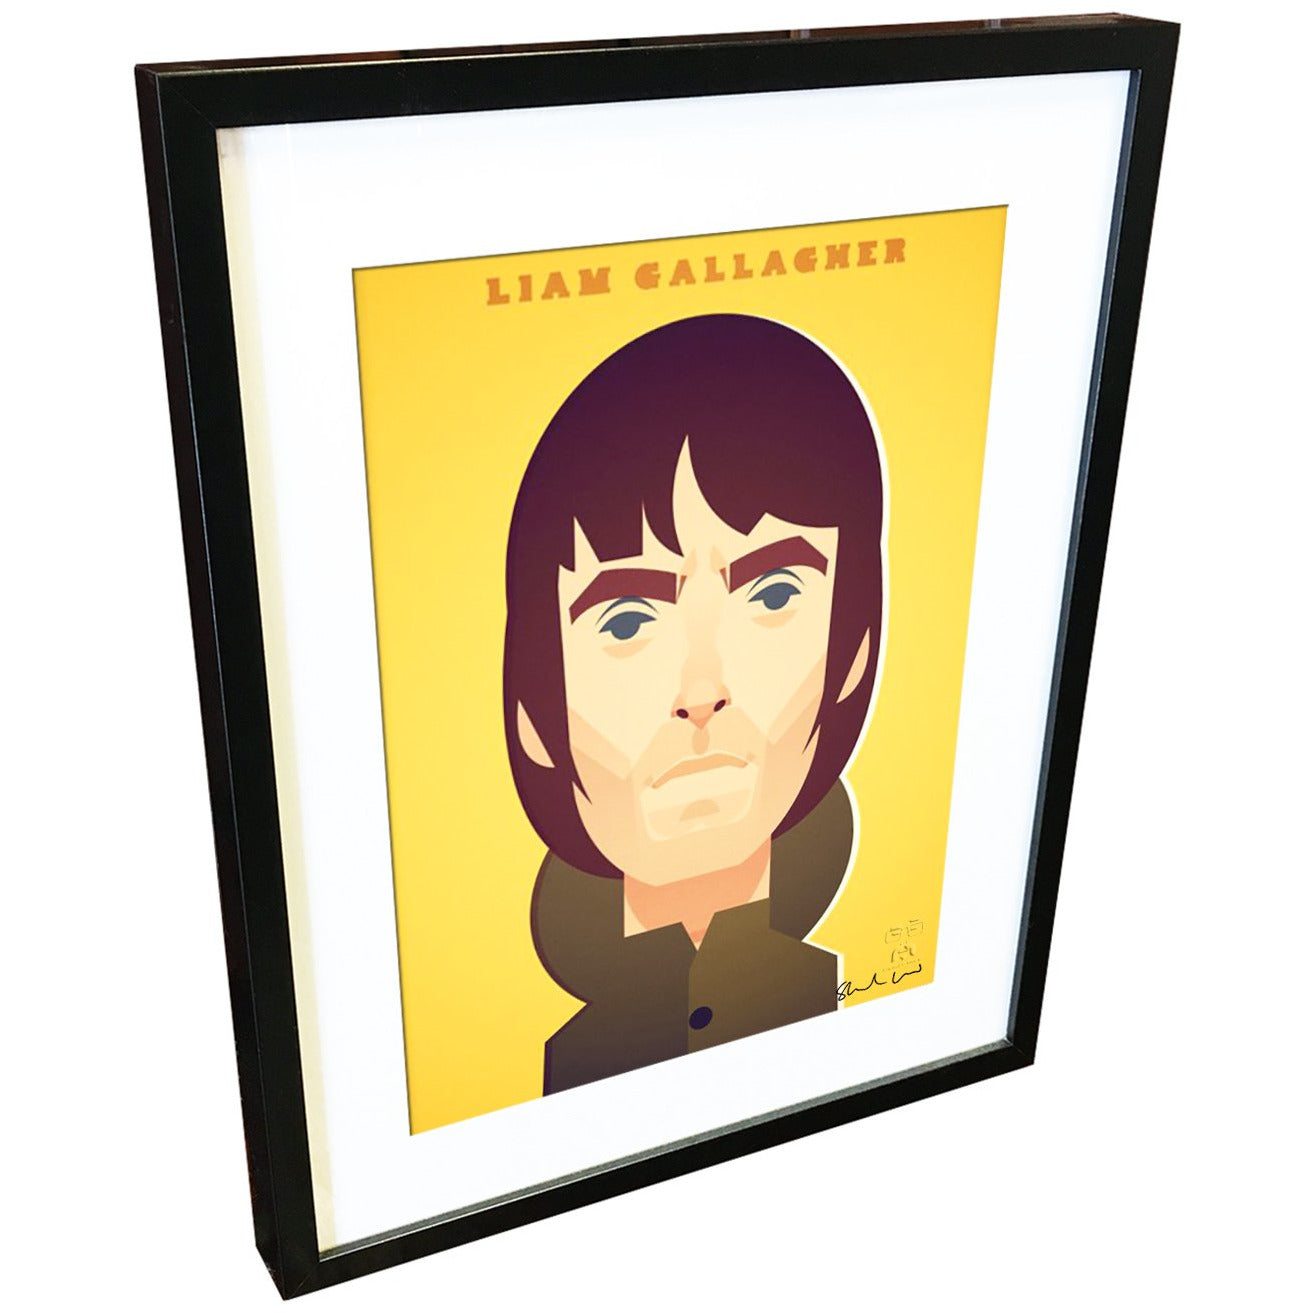 Laim Gallagher by Stanley Chow - Signed and stamped fine art print - Egoiste Gallery - Art Gallery in Manchester City Centre